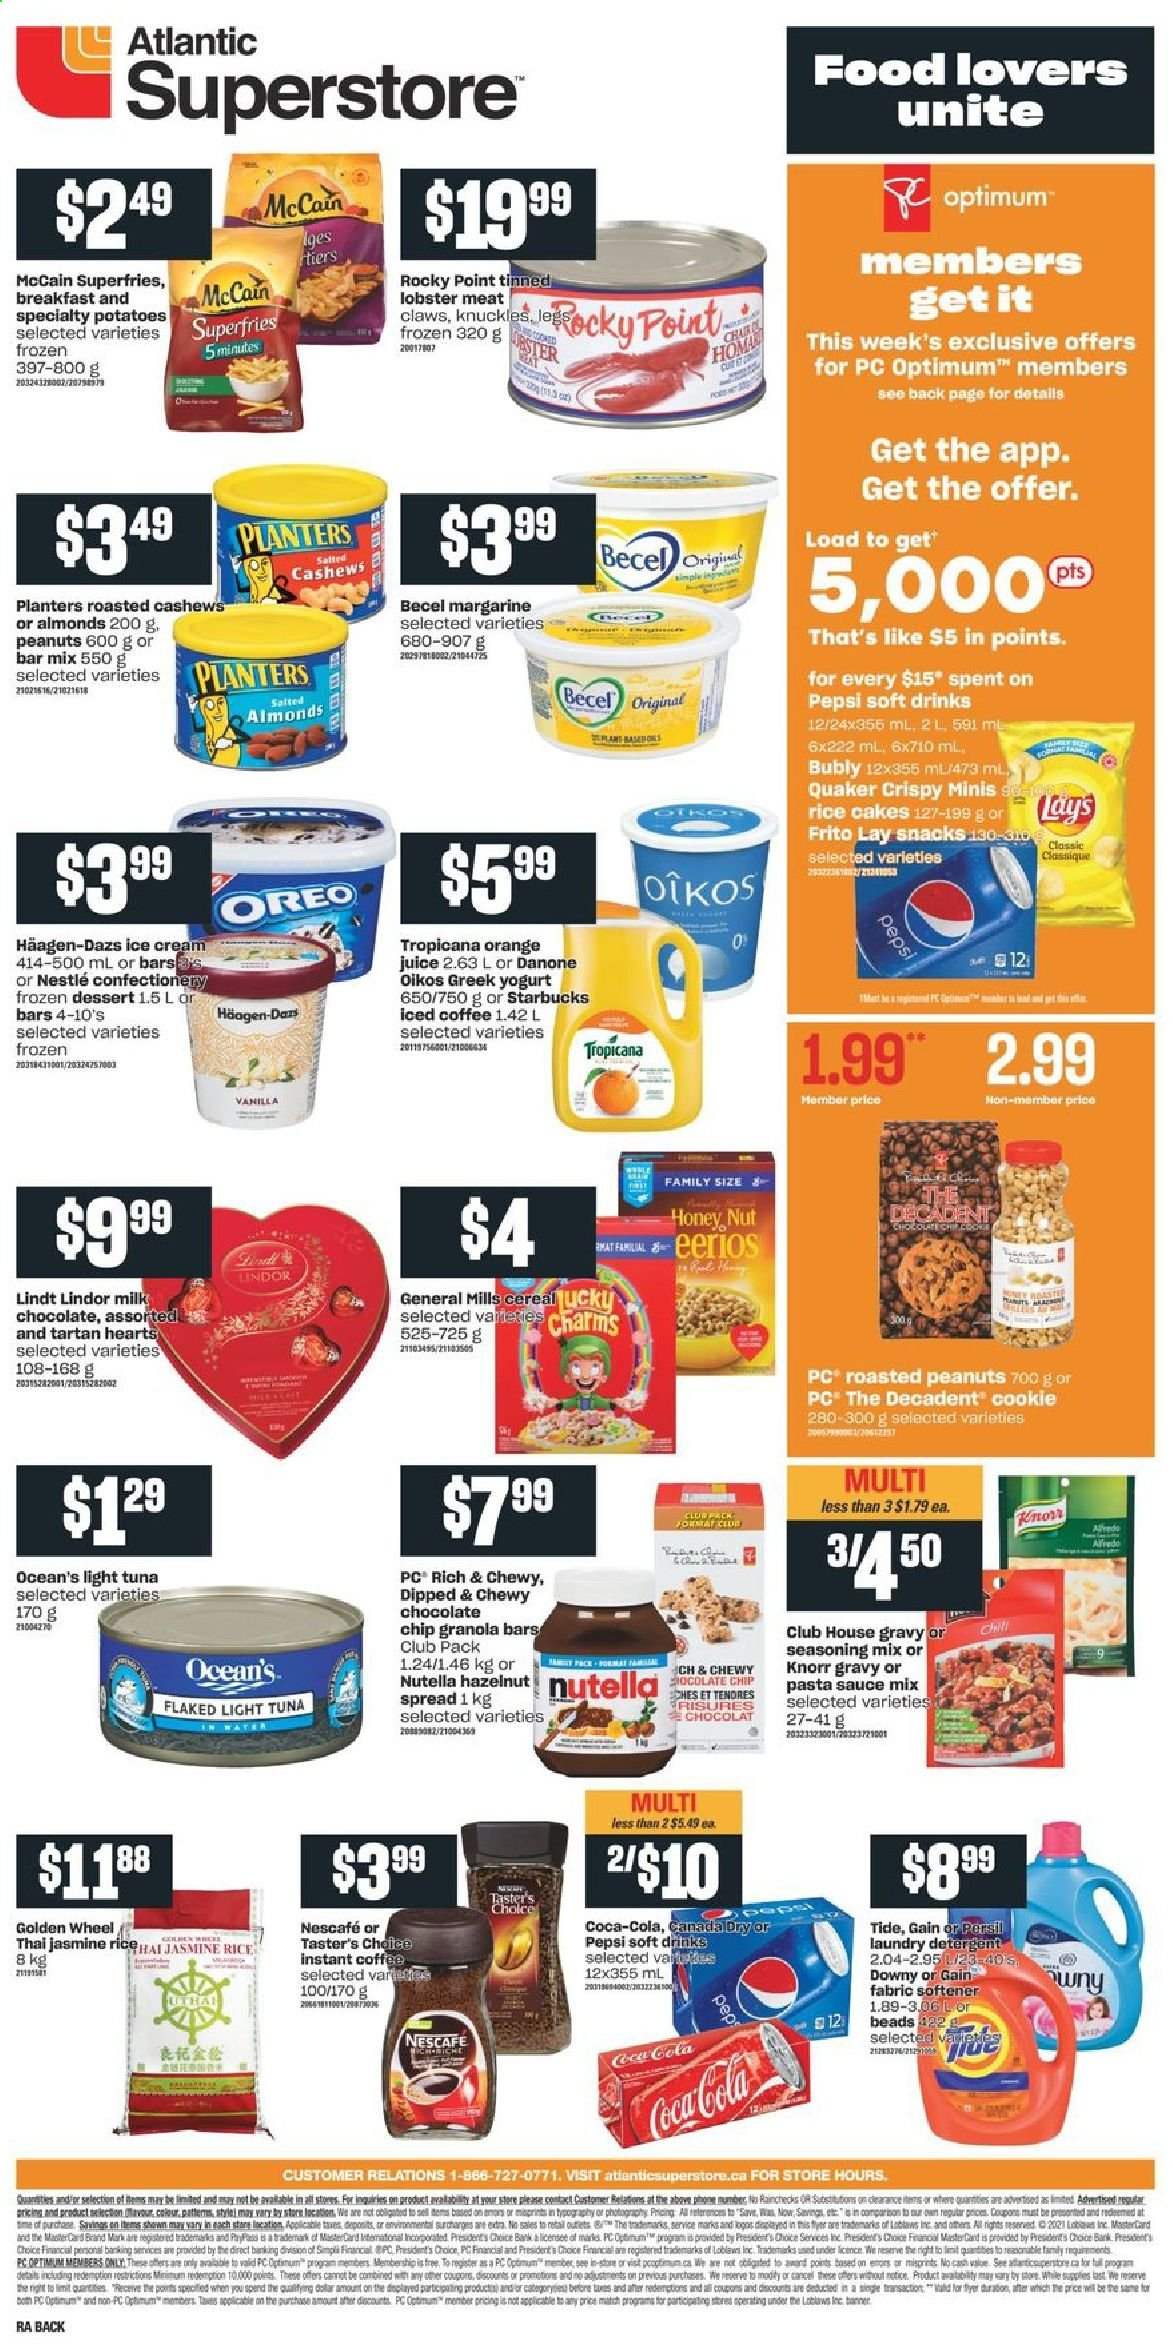 Atlantic Superstore flyer  - February 04, 2021 - February 10, 2021. Page 2.